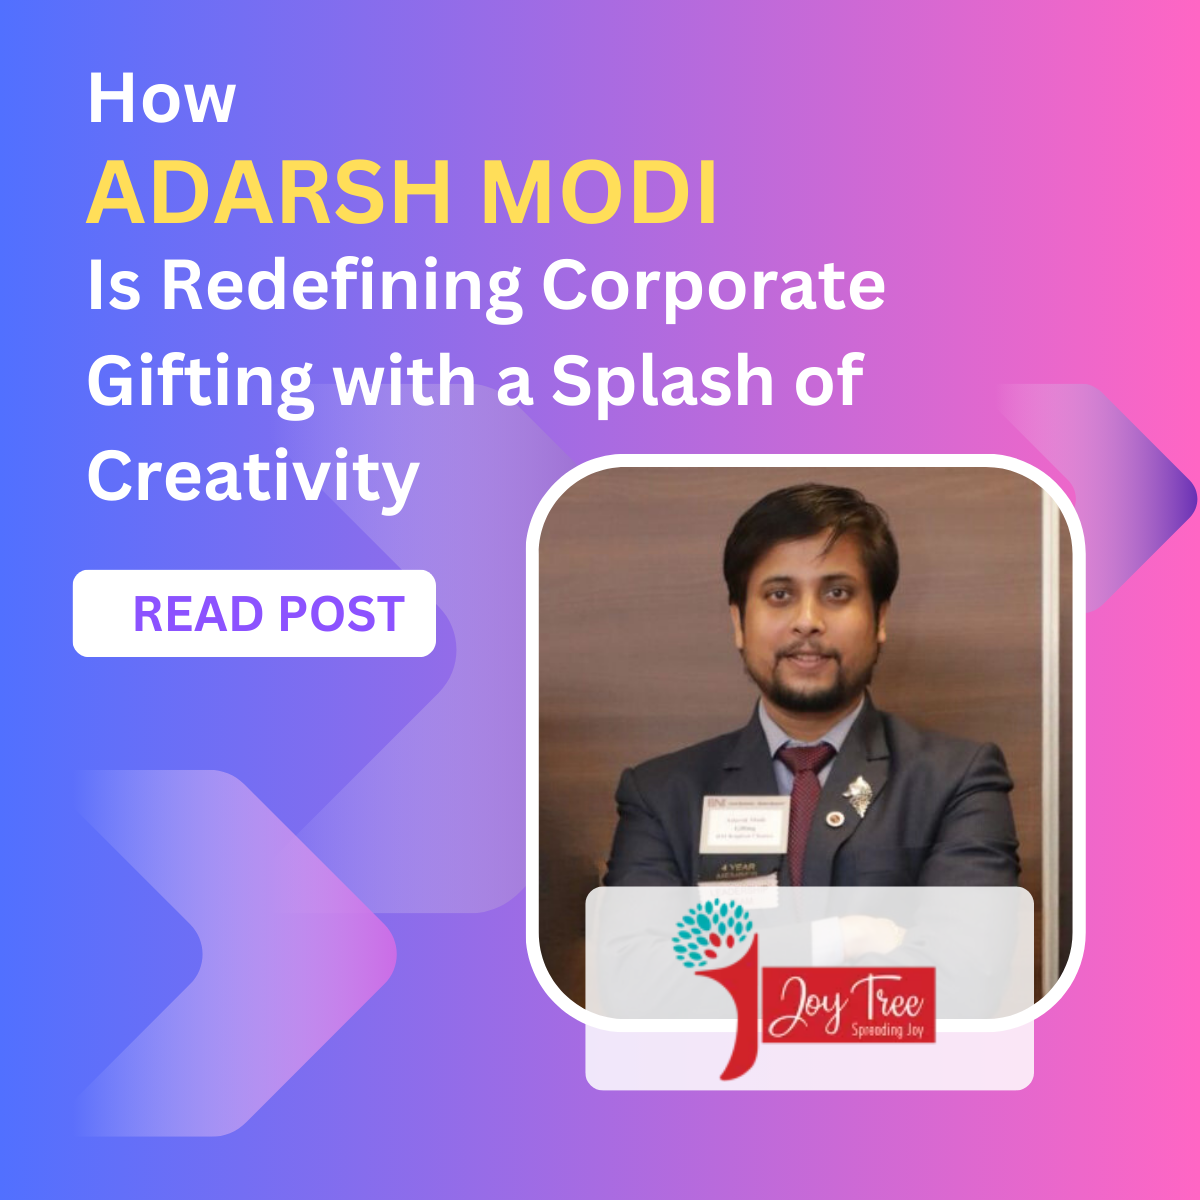 Redifing corporate gifting with a splash of creativity